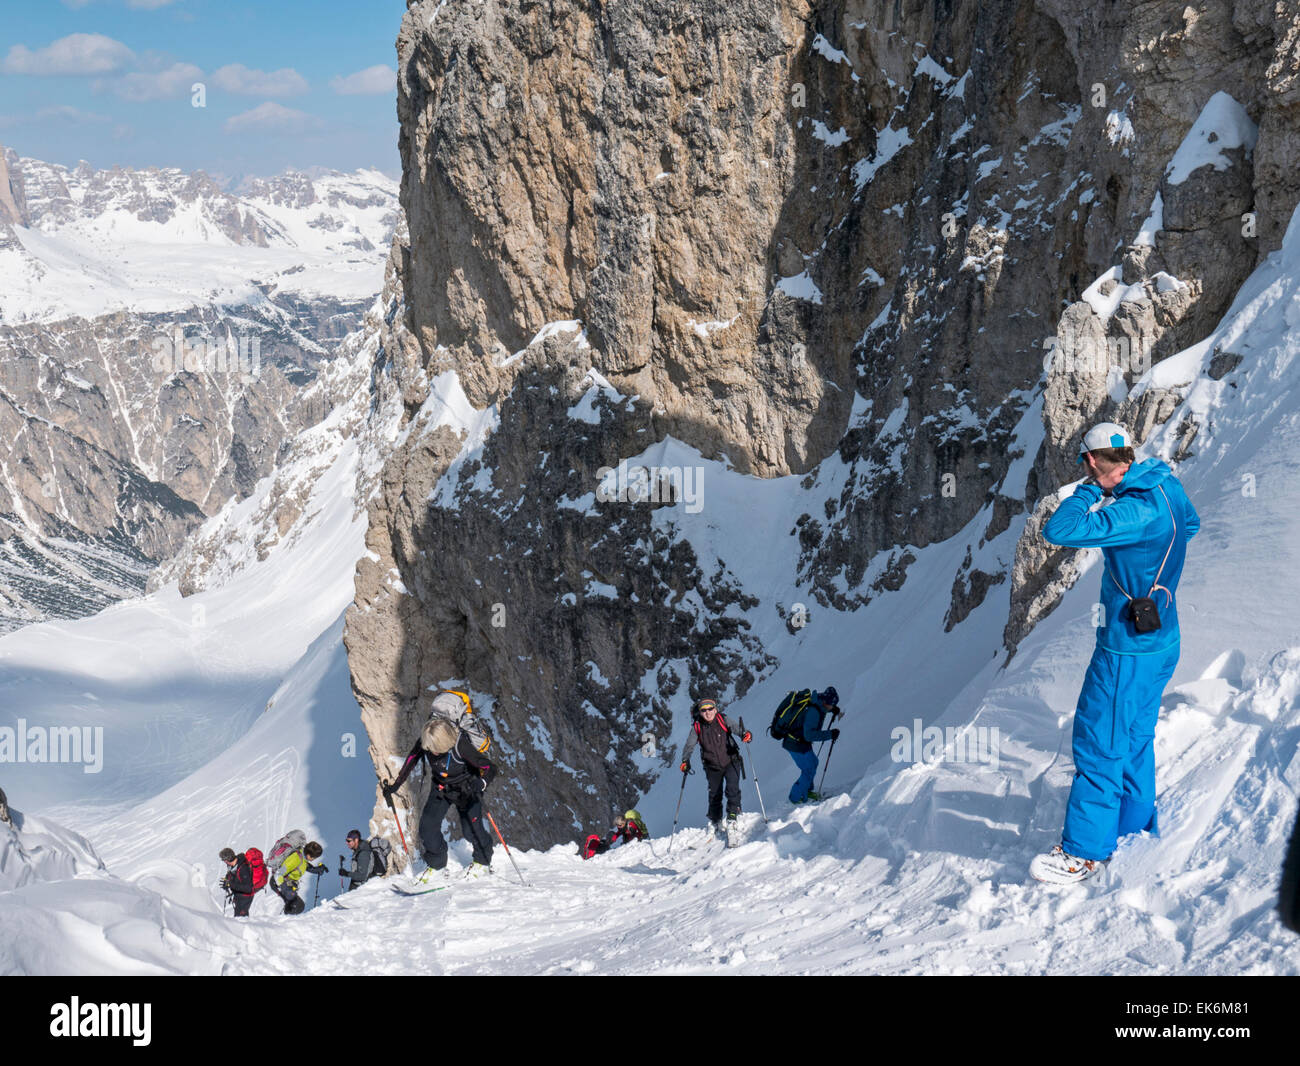 Backcountry skiers, northeast of Cortina, Dolomite Mountains, Alps, Italy Stock Photo